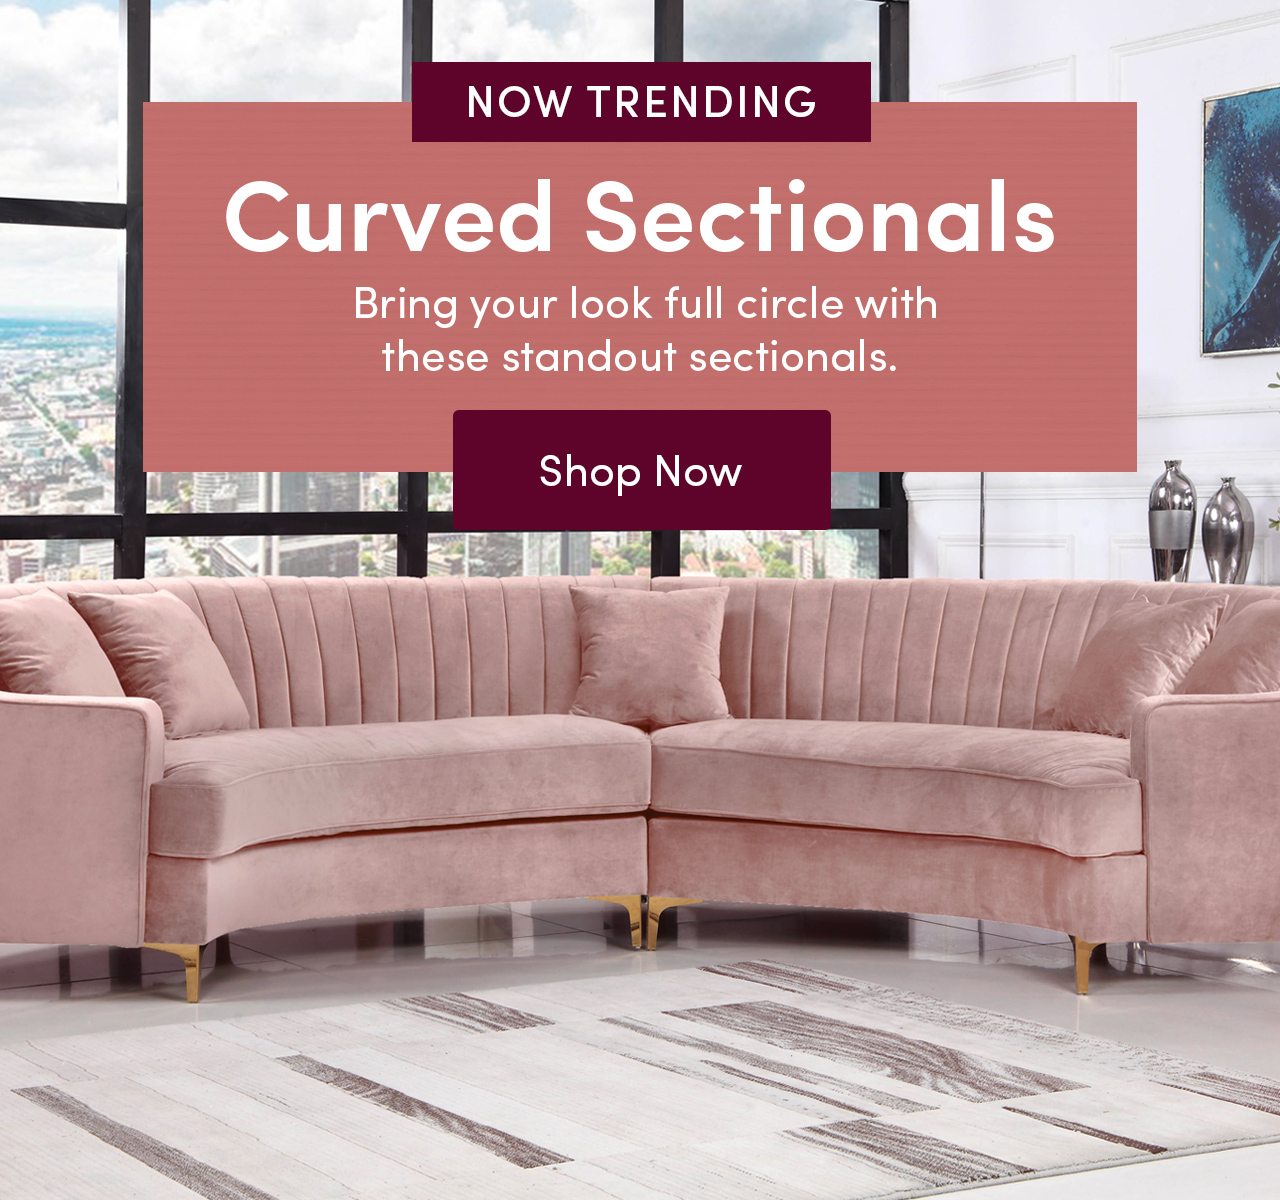 Curved Sectionals